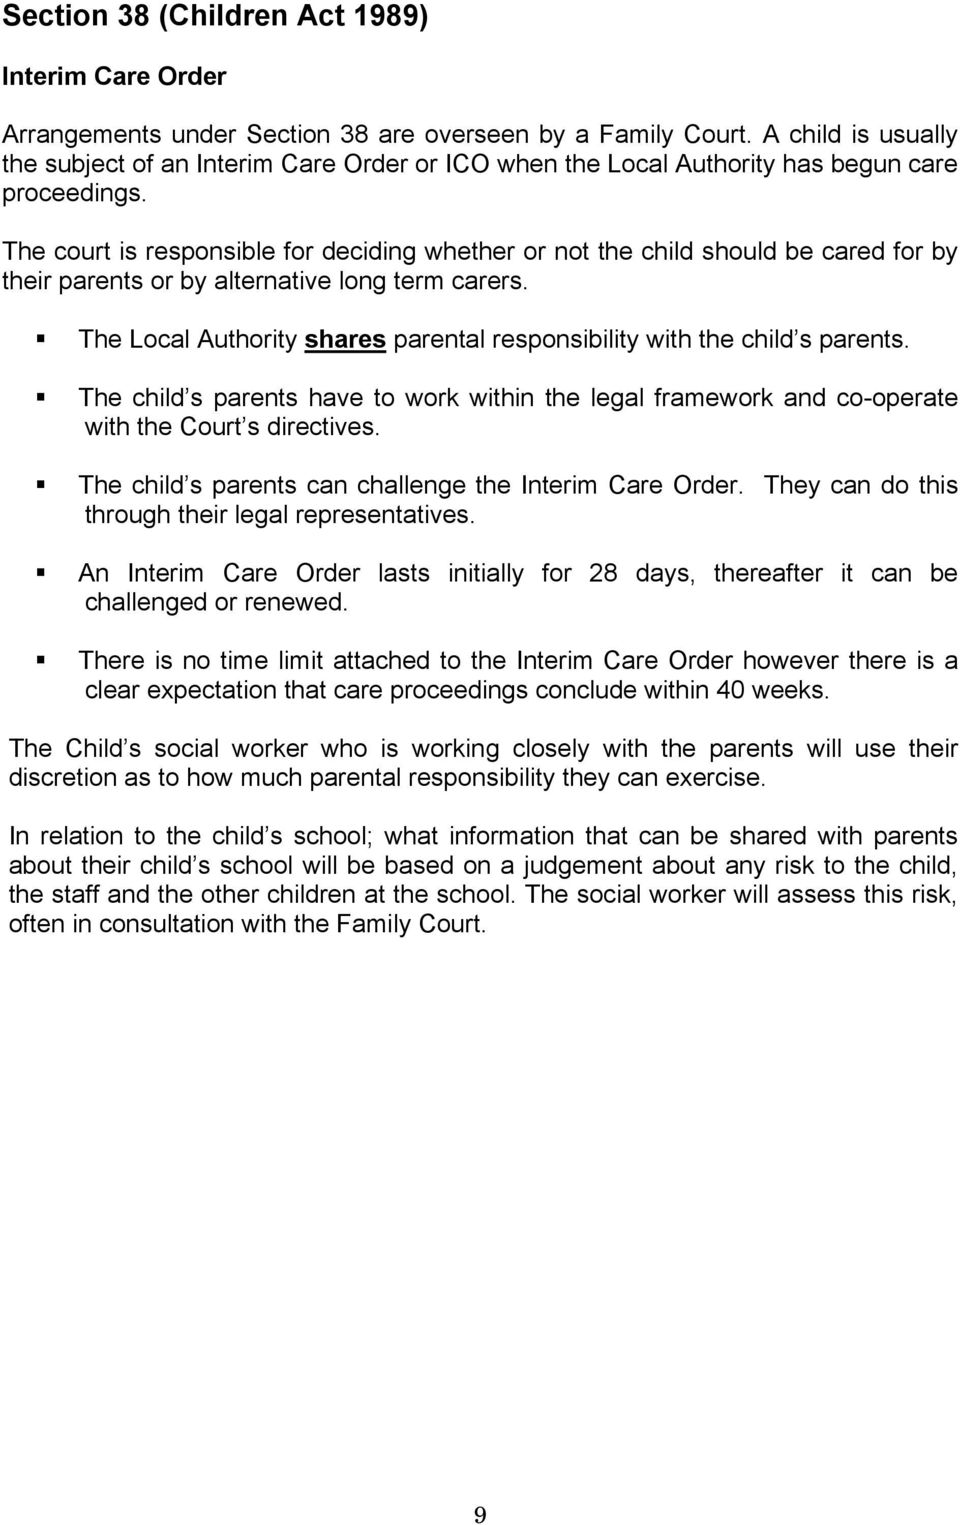 The court is responsible for deciding whether or not the child should be cared for by their parents or by alternative long term carers.